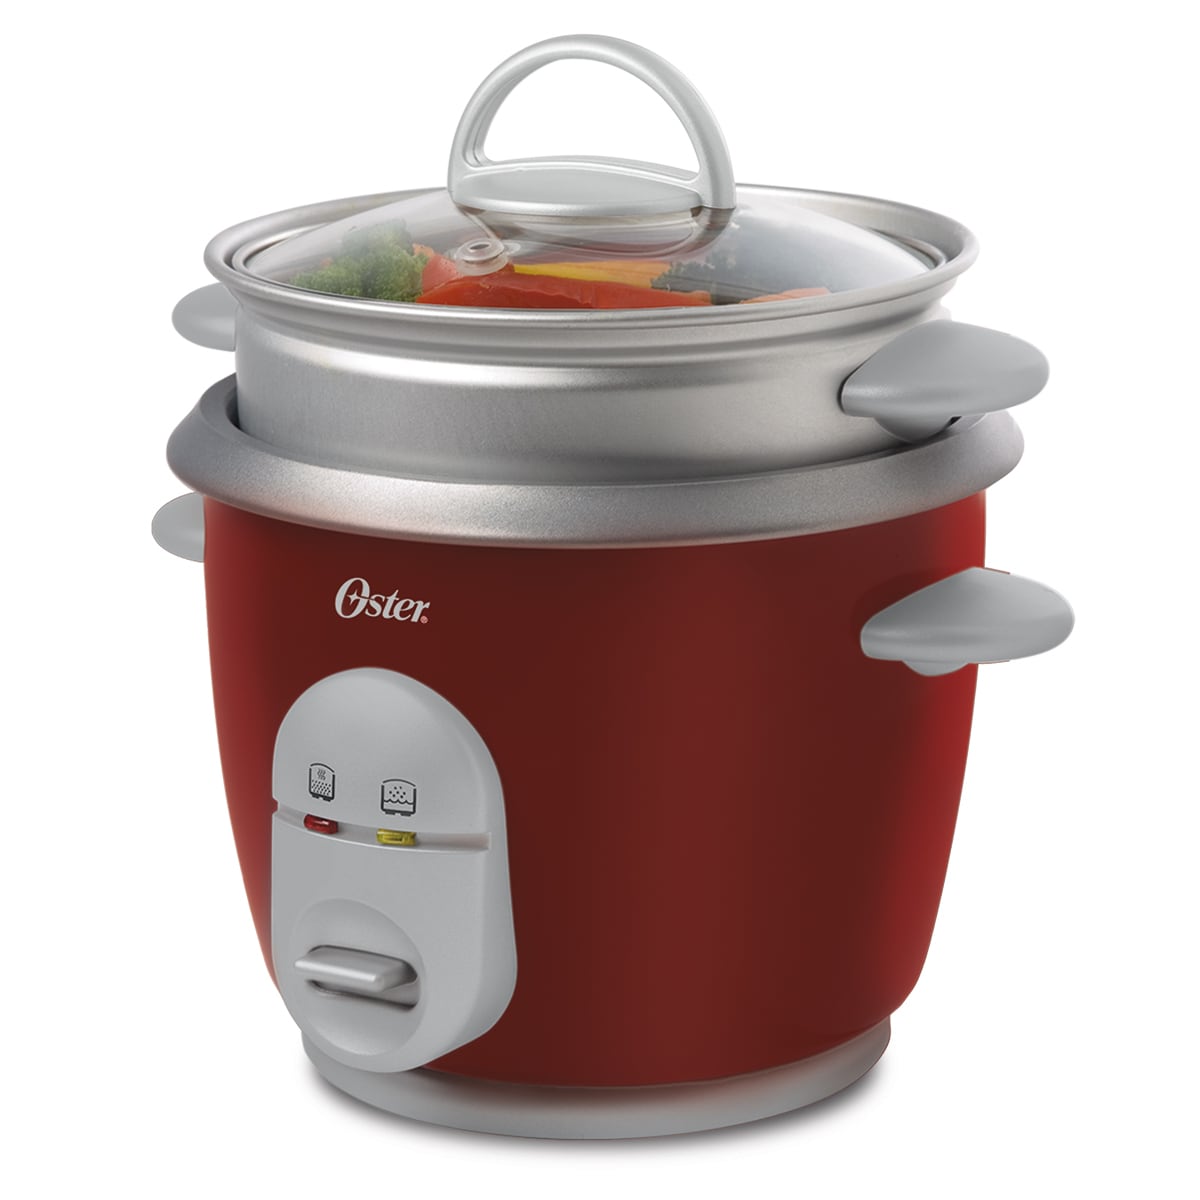 Oster 4728 220 Volt 7-Cup Rice Cooker